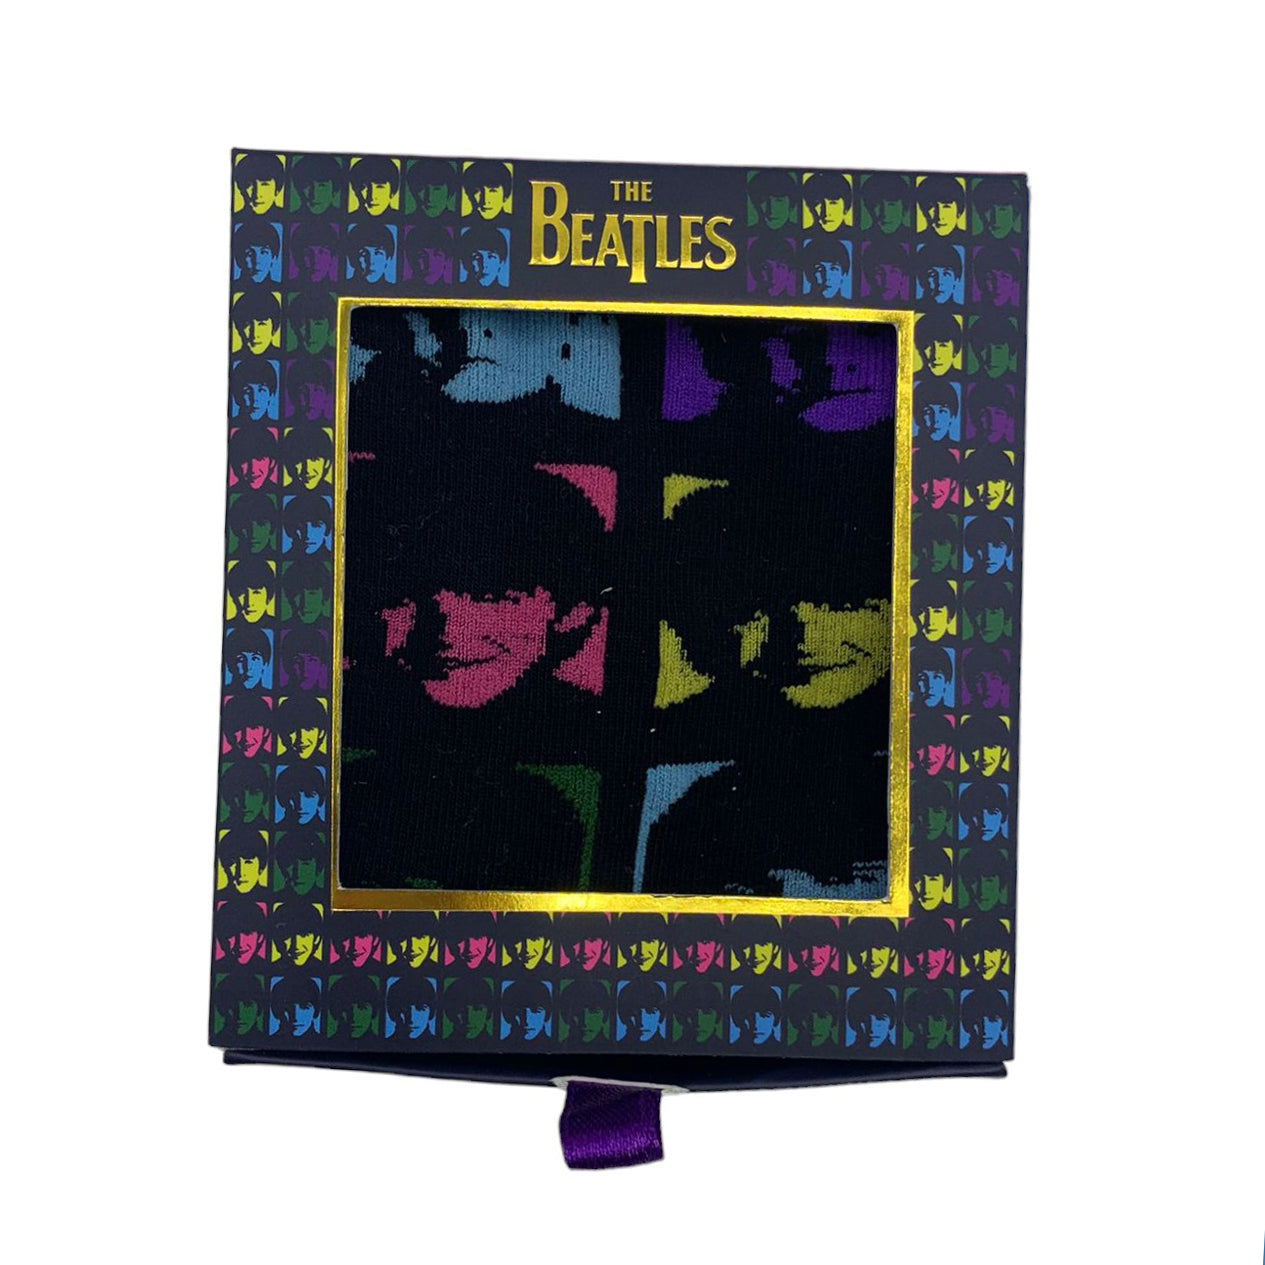 The Beatles Neon Faces Socks